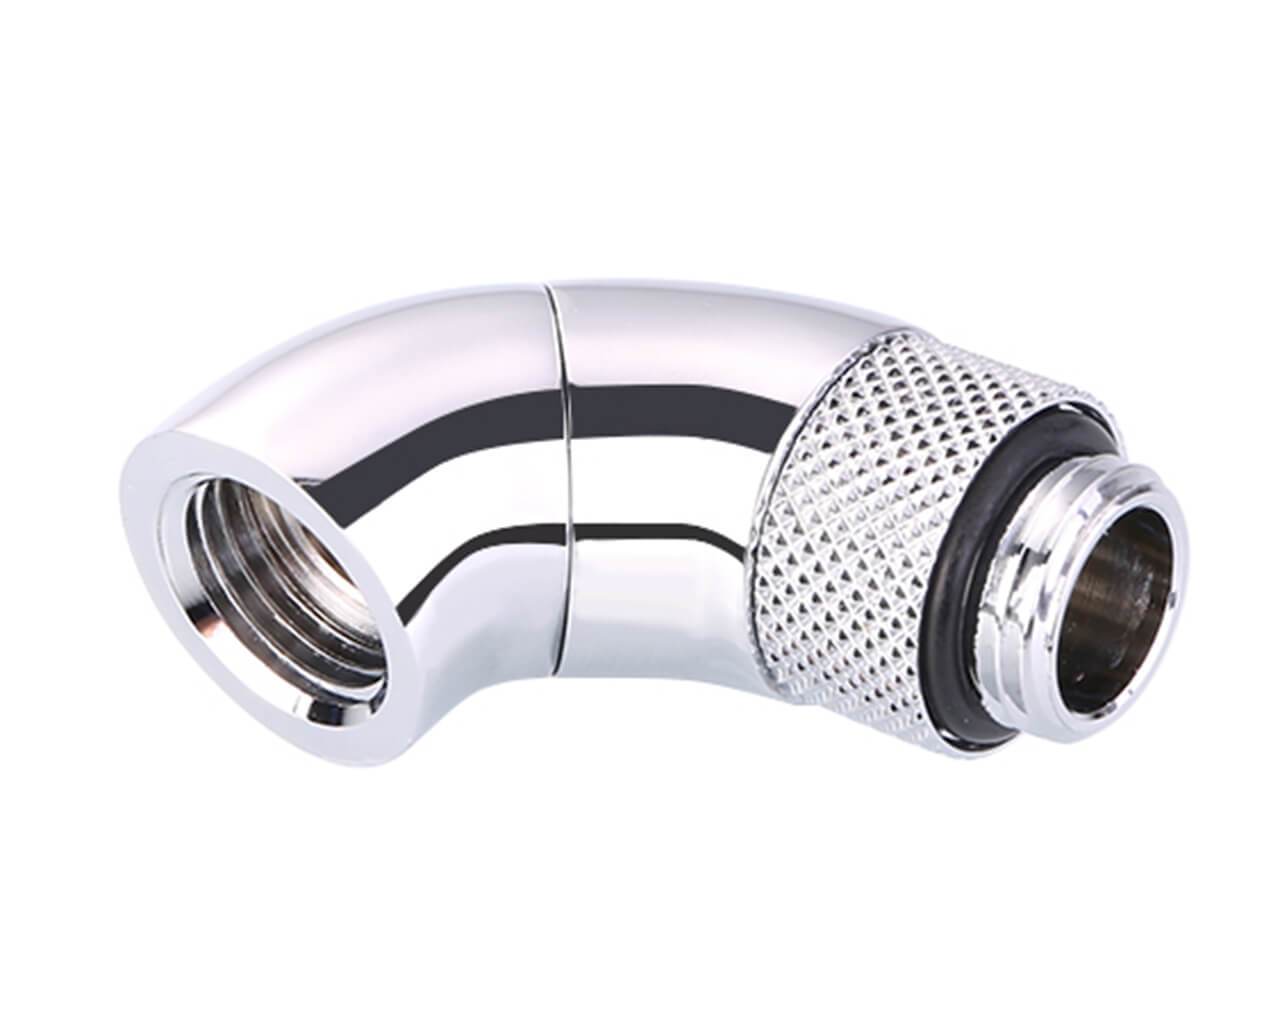 Bykski G 1/4in. Male to Female 90 Degree Double Rotary Elbow Fitting (B-RD90-SK) - PrimoChill - KEEPING IT COOL Silver